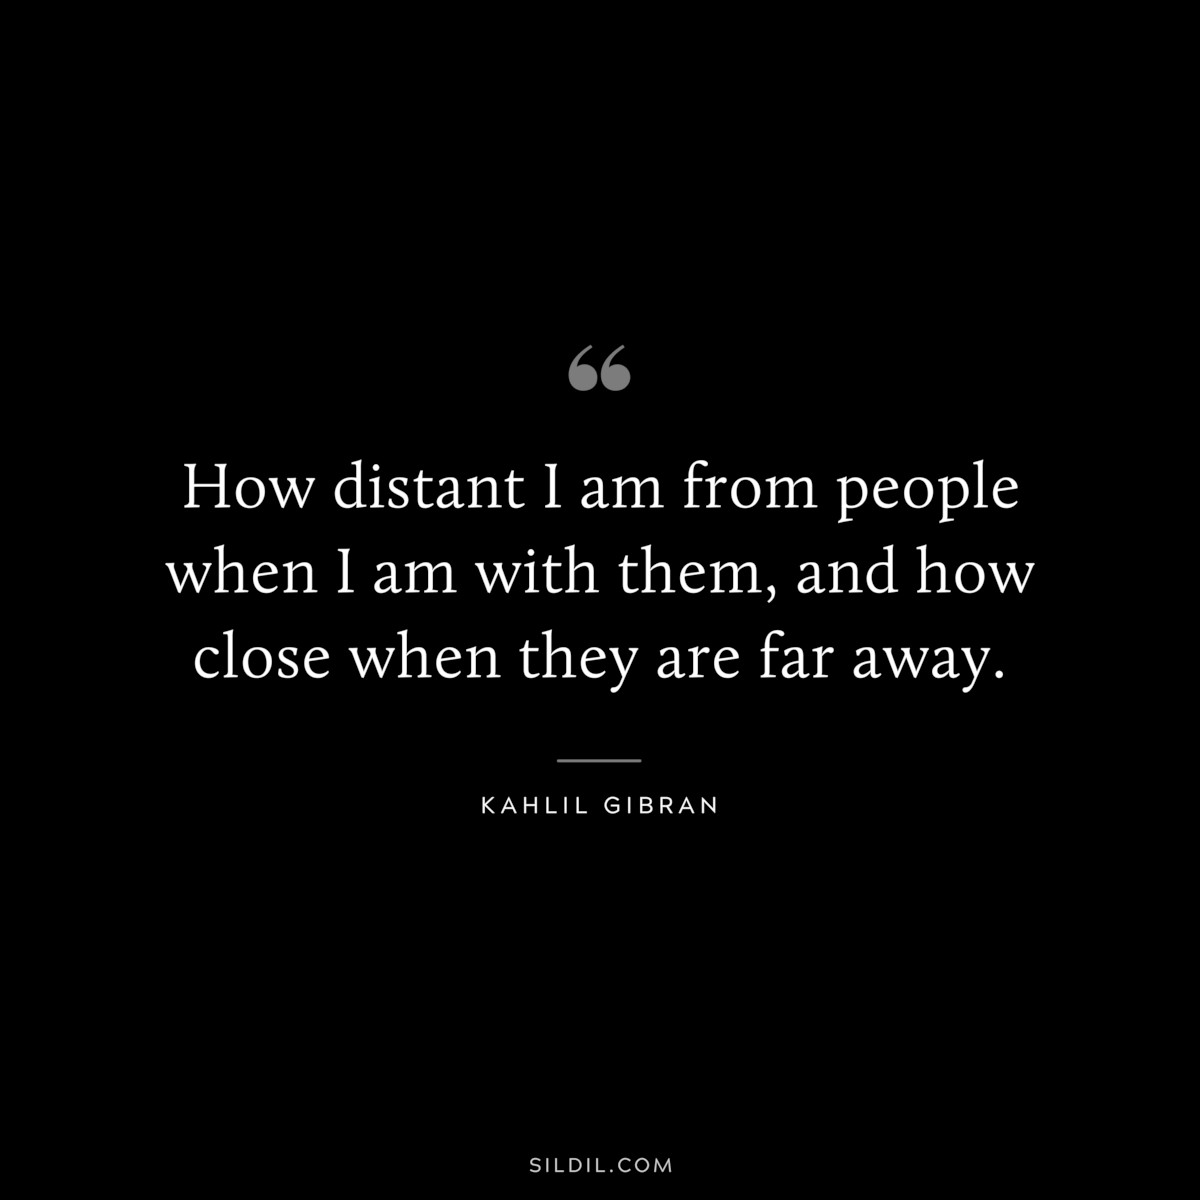 How distant I am from people when I am with them, and how close when they are far away. ― Kahlil Gibran